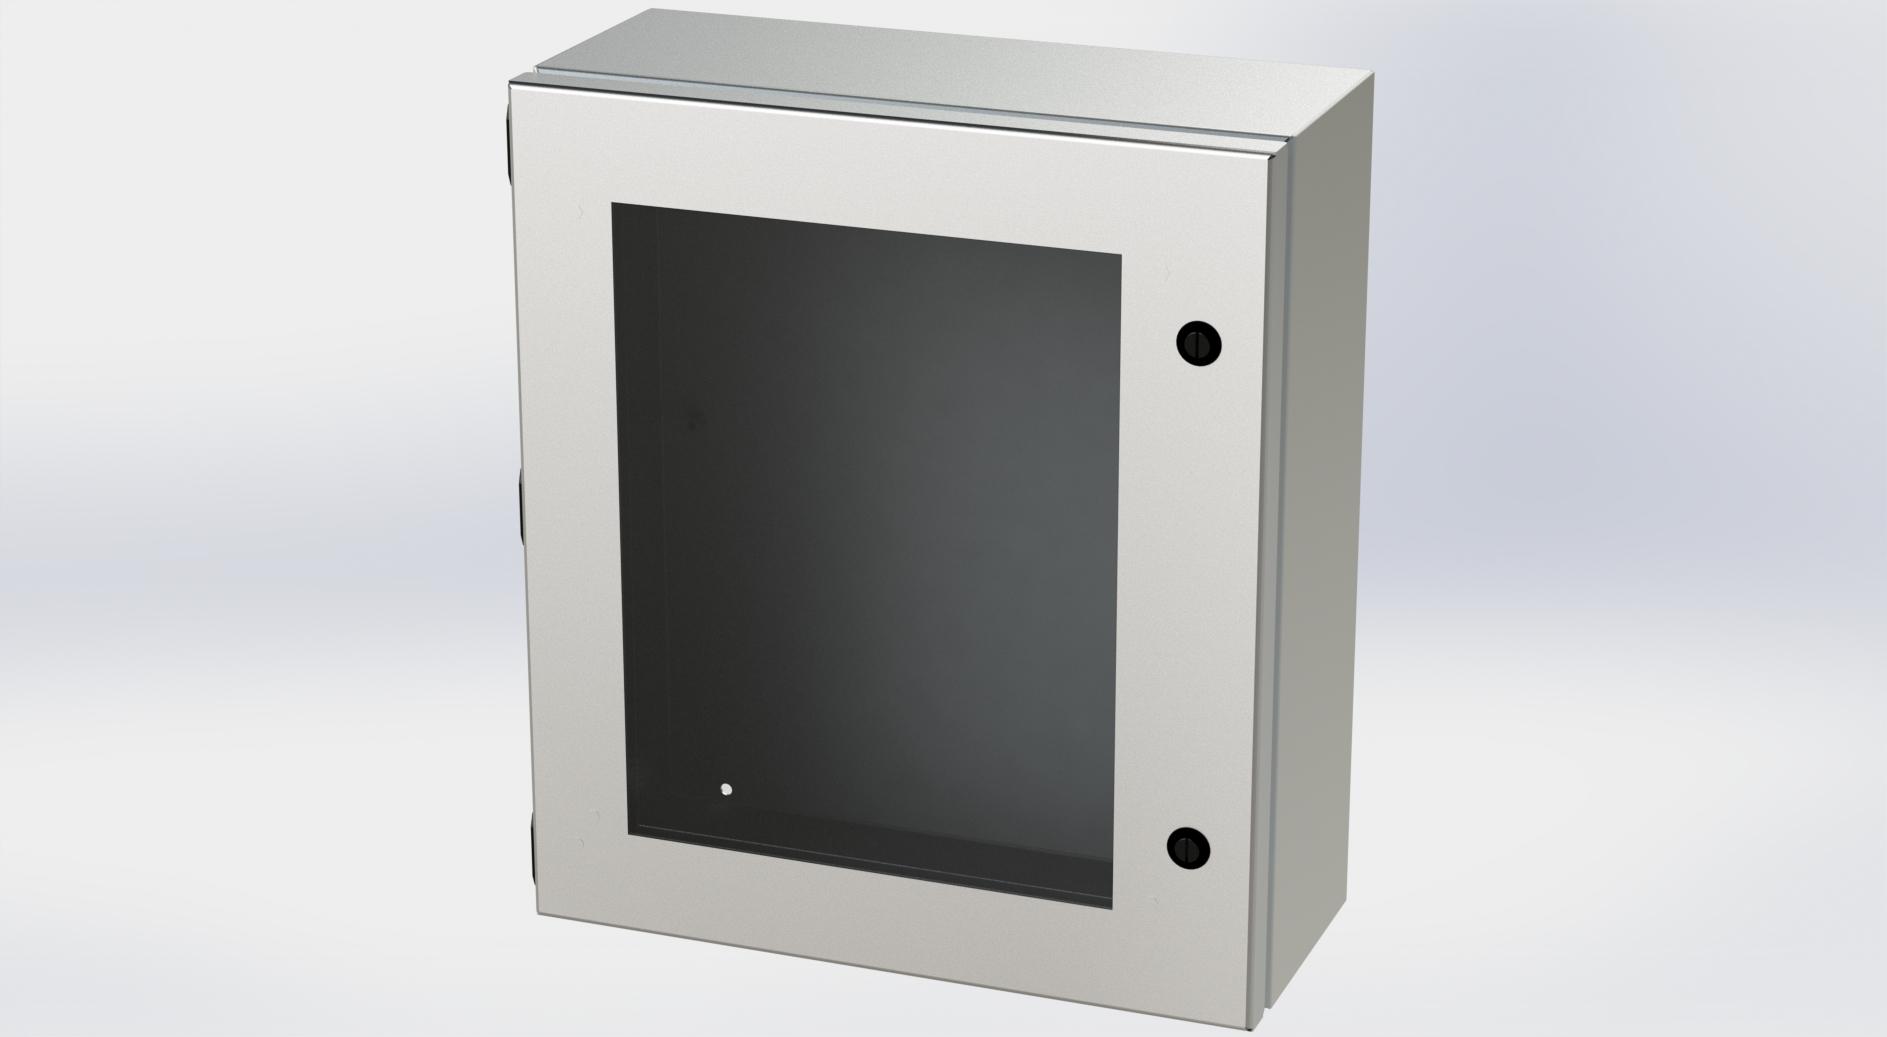 Saginaw Control SCE-1614ELJWSS6 S.S. ELJ Enclosure W/Viewing Window, Height:16.00", Width:14.00", Depth:6.00", #4 brushed finish on all exterior surfaces. Optional panels are powder coated white.